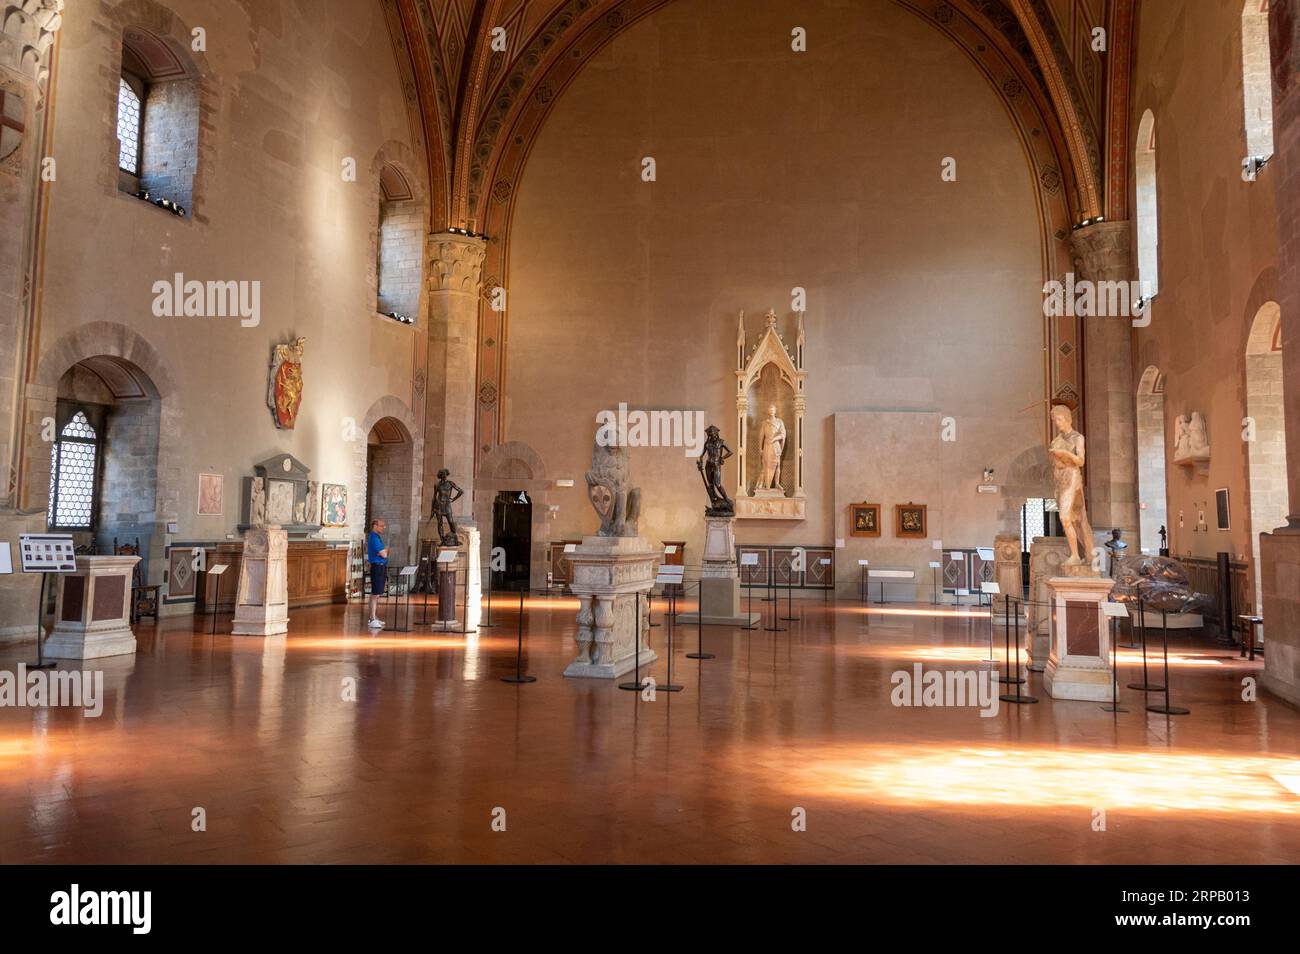 A selection of sculptures in the Donatello room inside the Museo Nazionale del Bargello  (Bargello National Museum). The museum is one of the oldest p Stock Photo